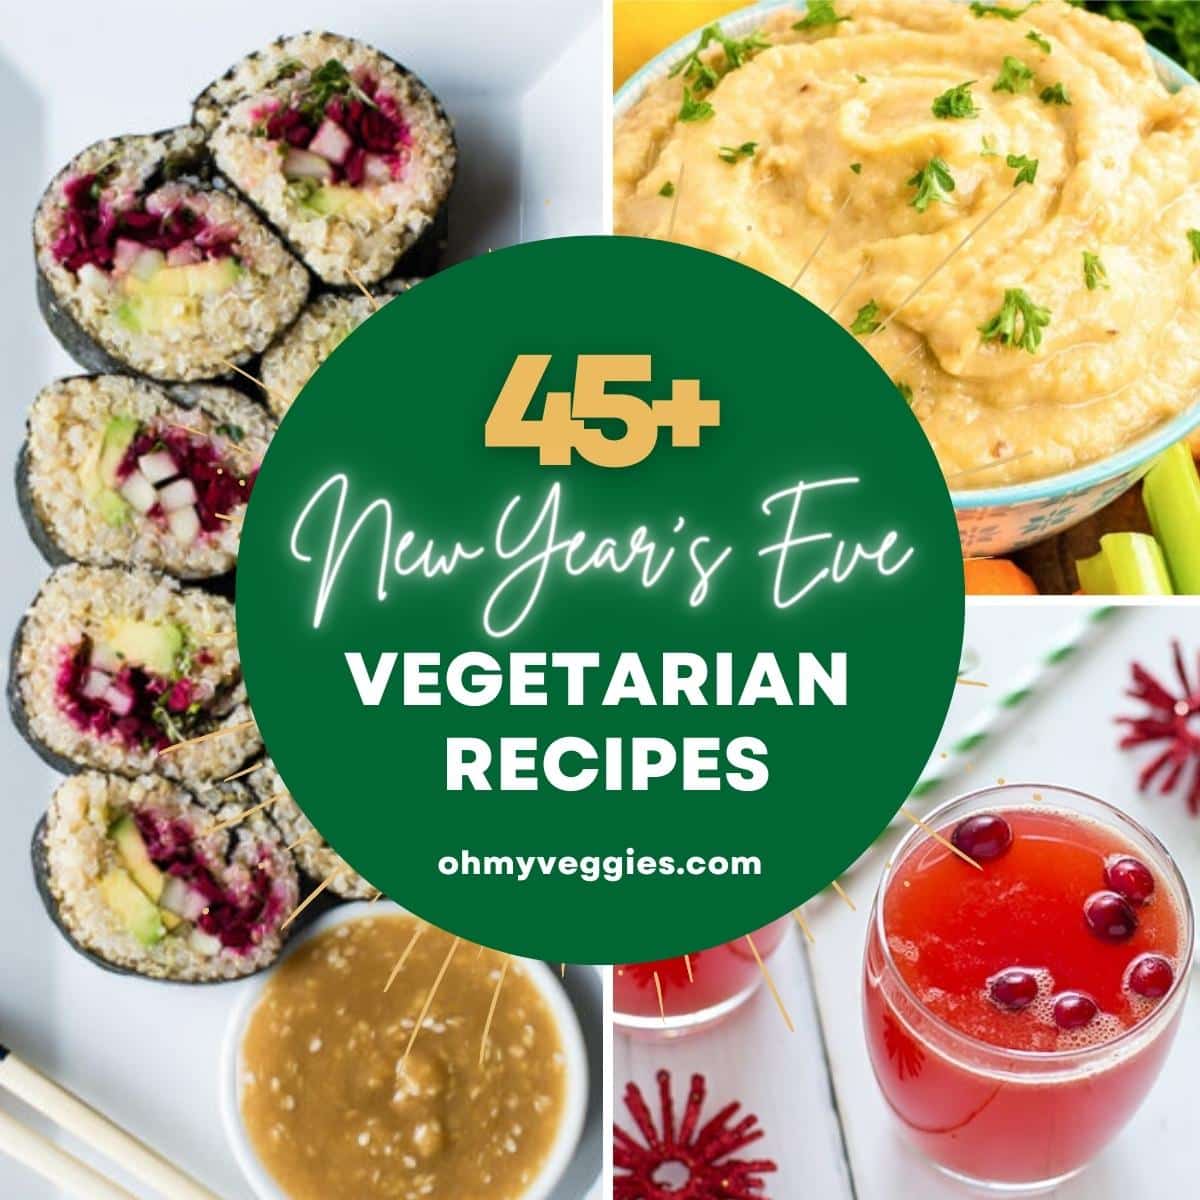 vegetarian recipes for new year’s eve